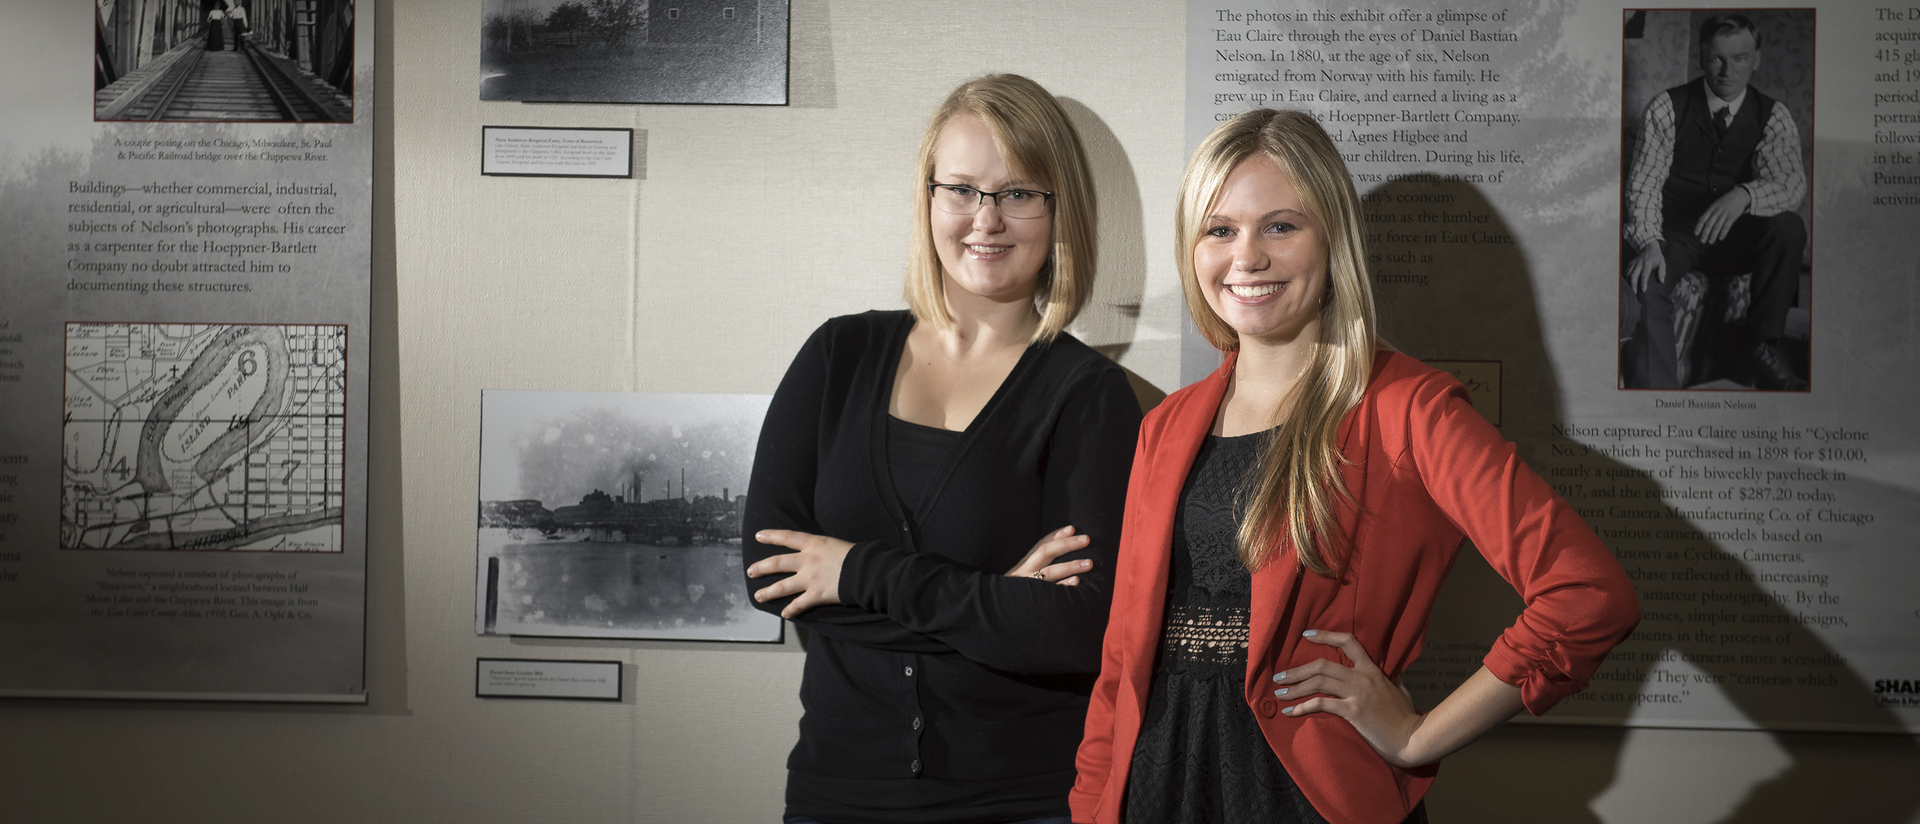 History students Sarah Beer and Makayla Elder with the display of their capstone project "Through Daniel's Eyes"